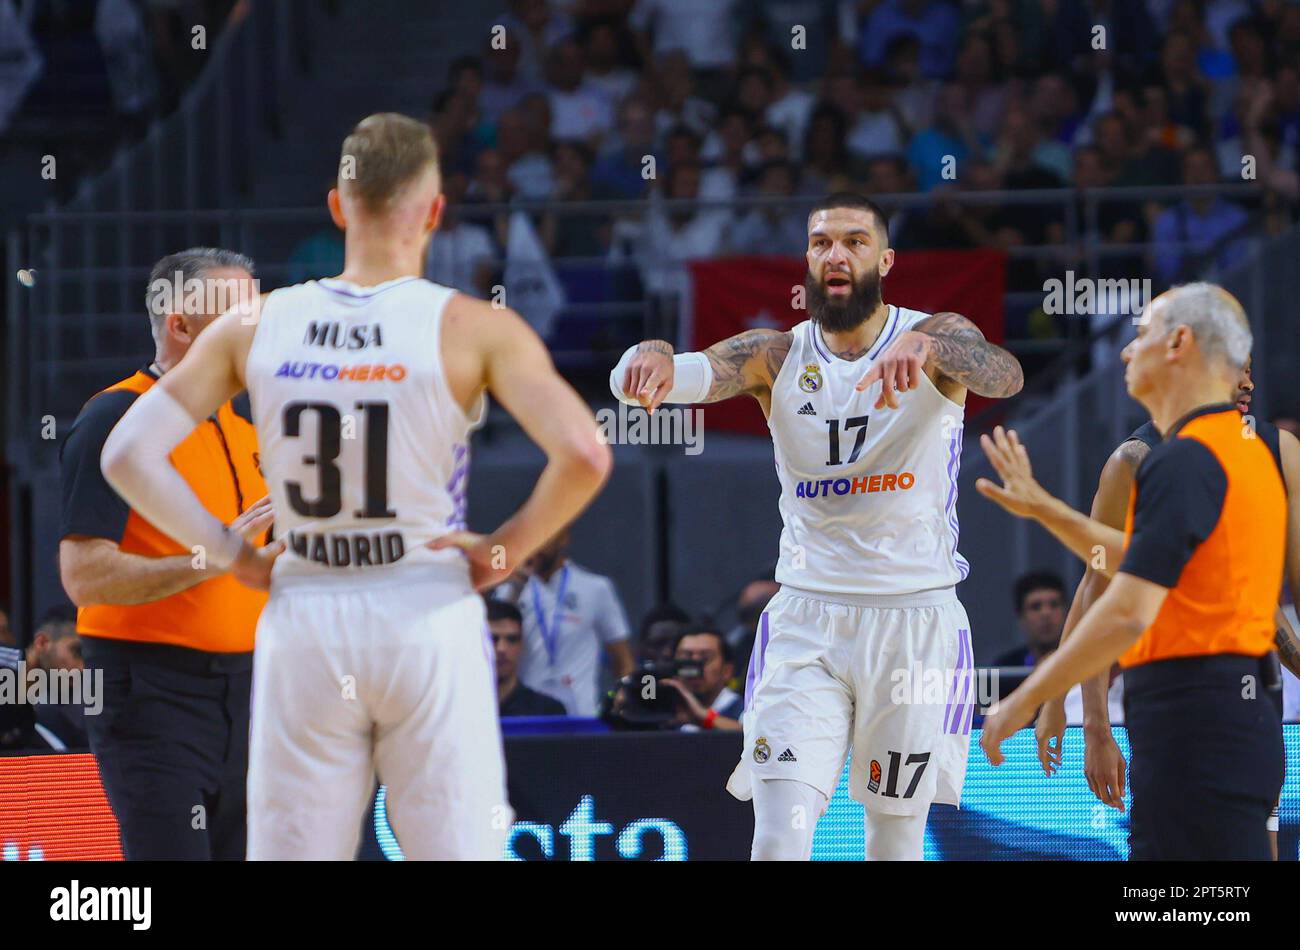 Belgrade, Serbia, 4 May 2023. Uros Trifunovic of Partizan Mozzart Bet  Belgrade warms up during the Play Offs Game 4 - 2022/2023 Turkish Airlines  EuroLeague match between Partizan Mozzart Bet Belgrade and